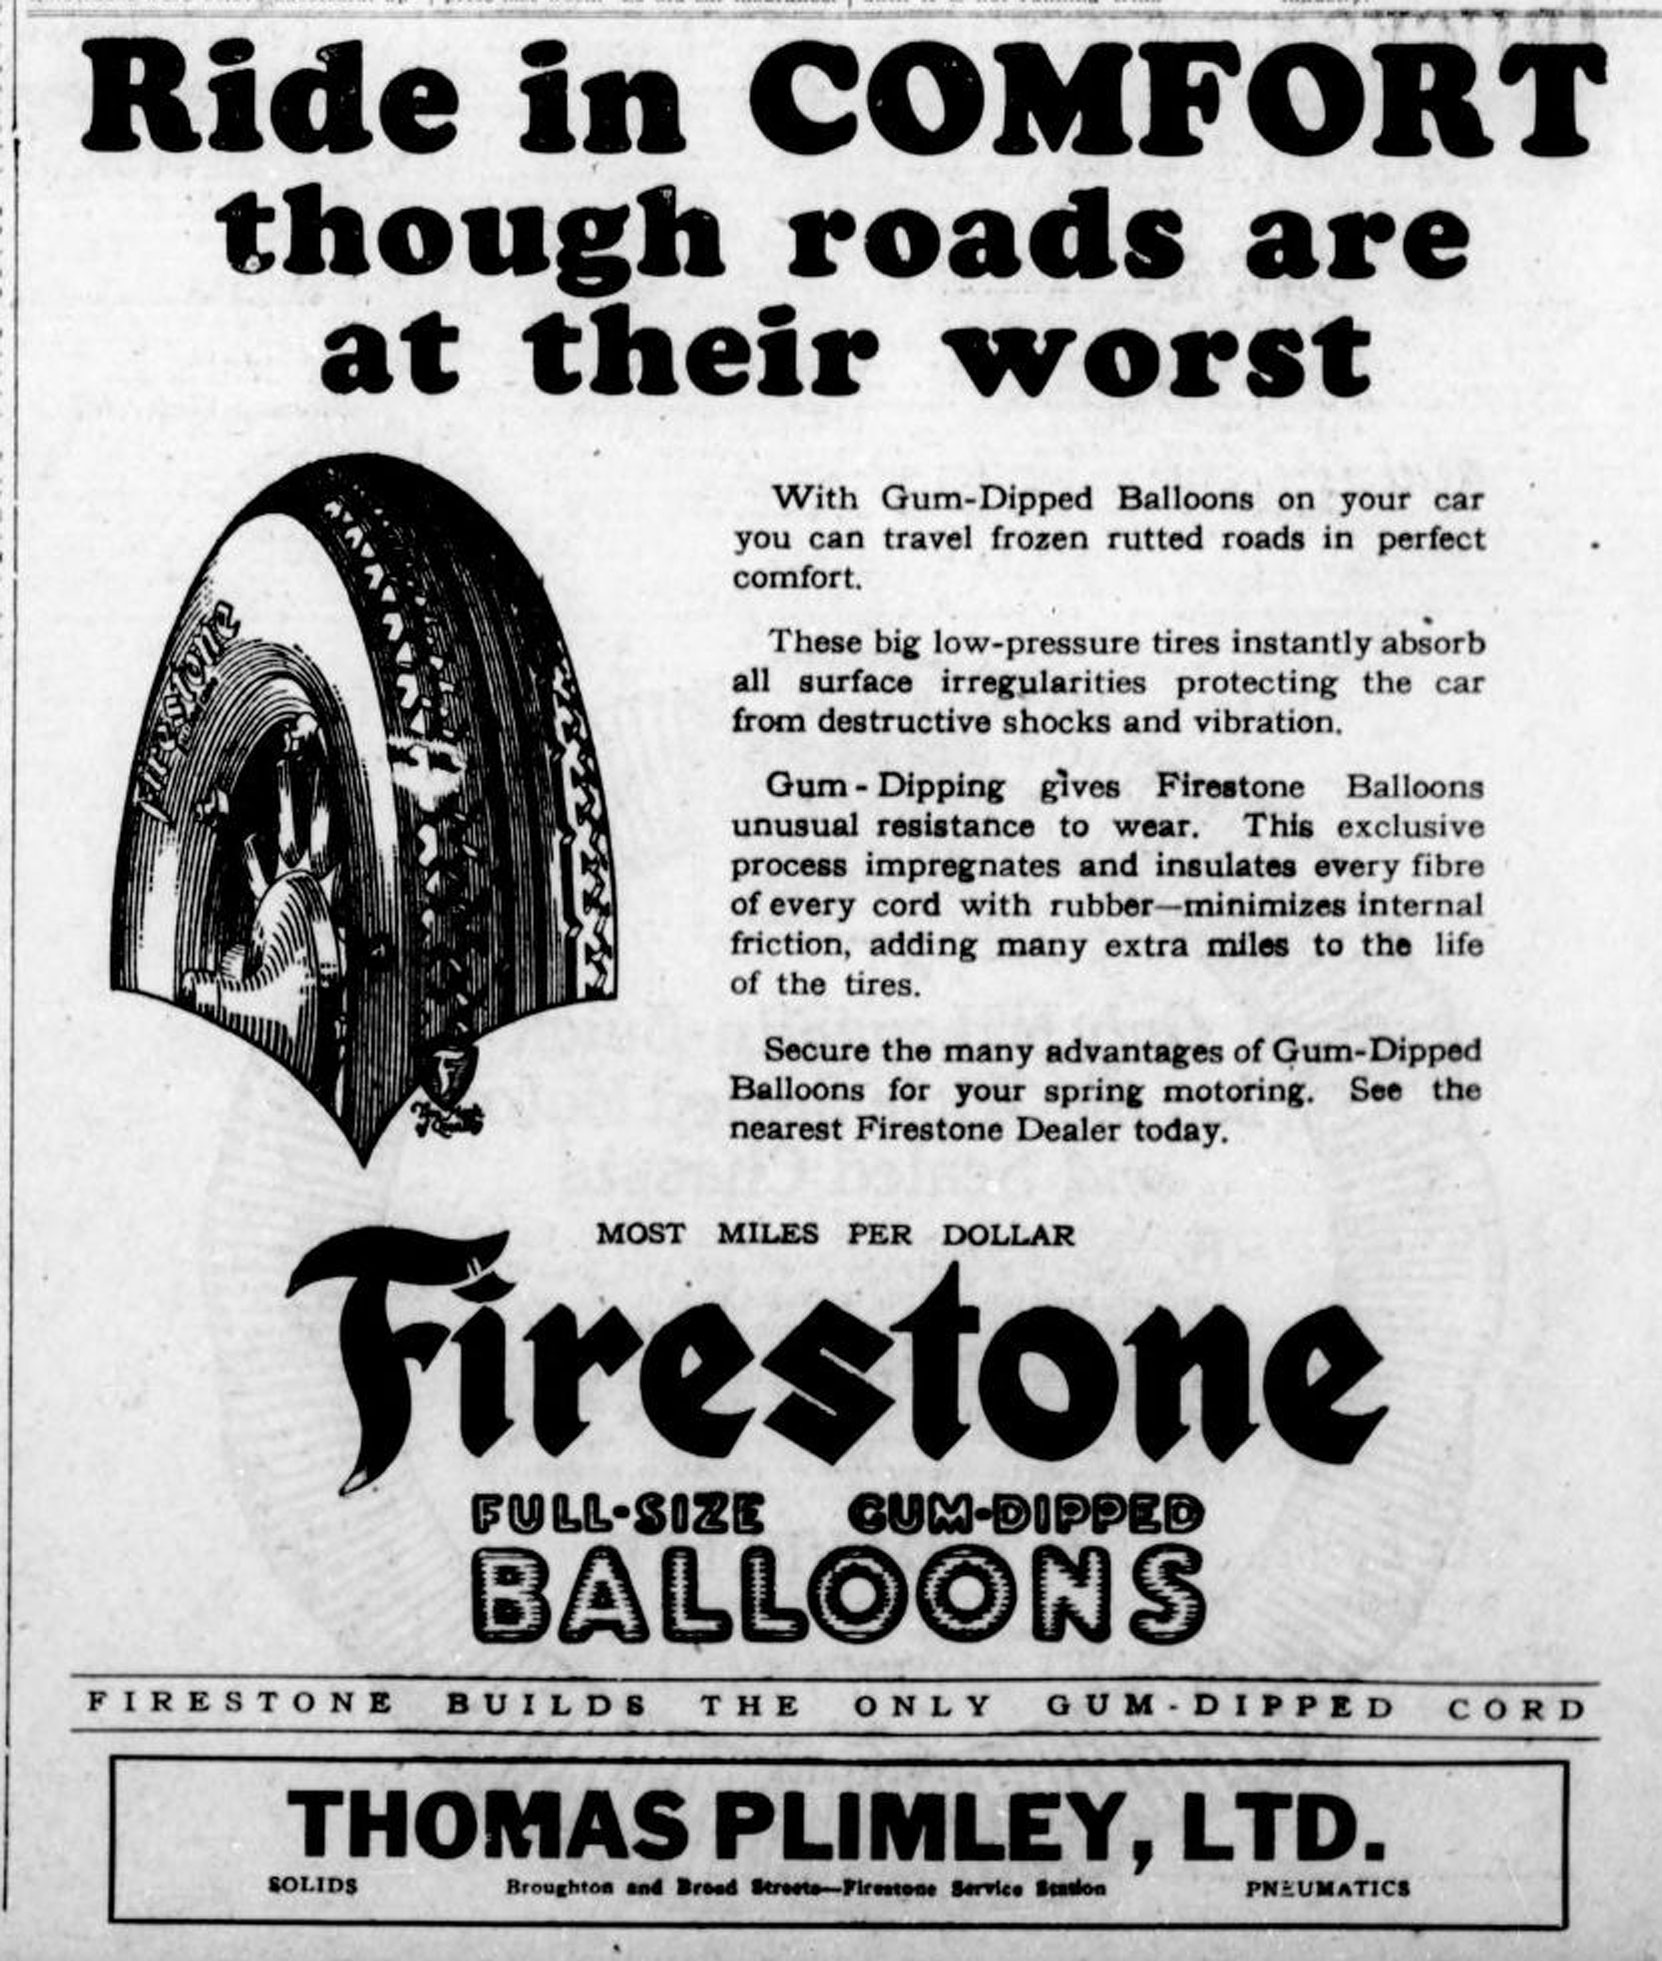 1926 advertisement for Firestone tires, sold at Thomas Plimley Ltd, Broughton Street at Broad Street. (Victoria Online Sightseeing Tours collection)